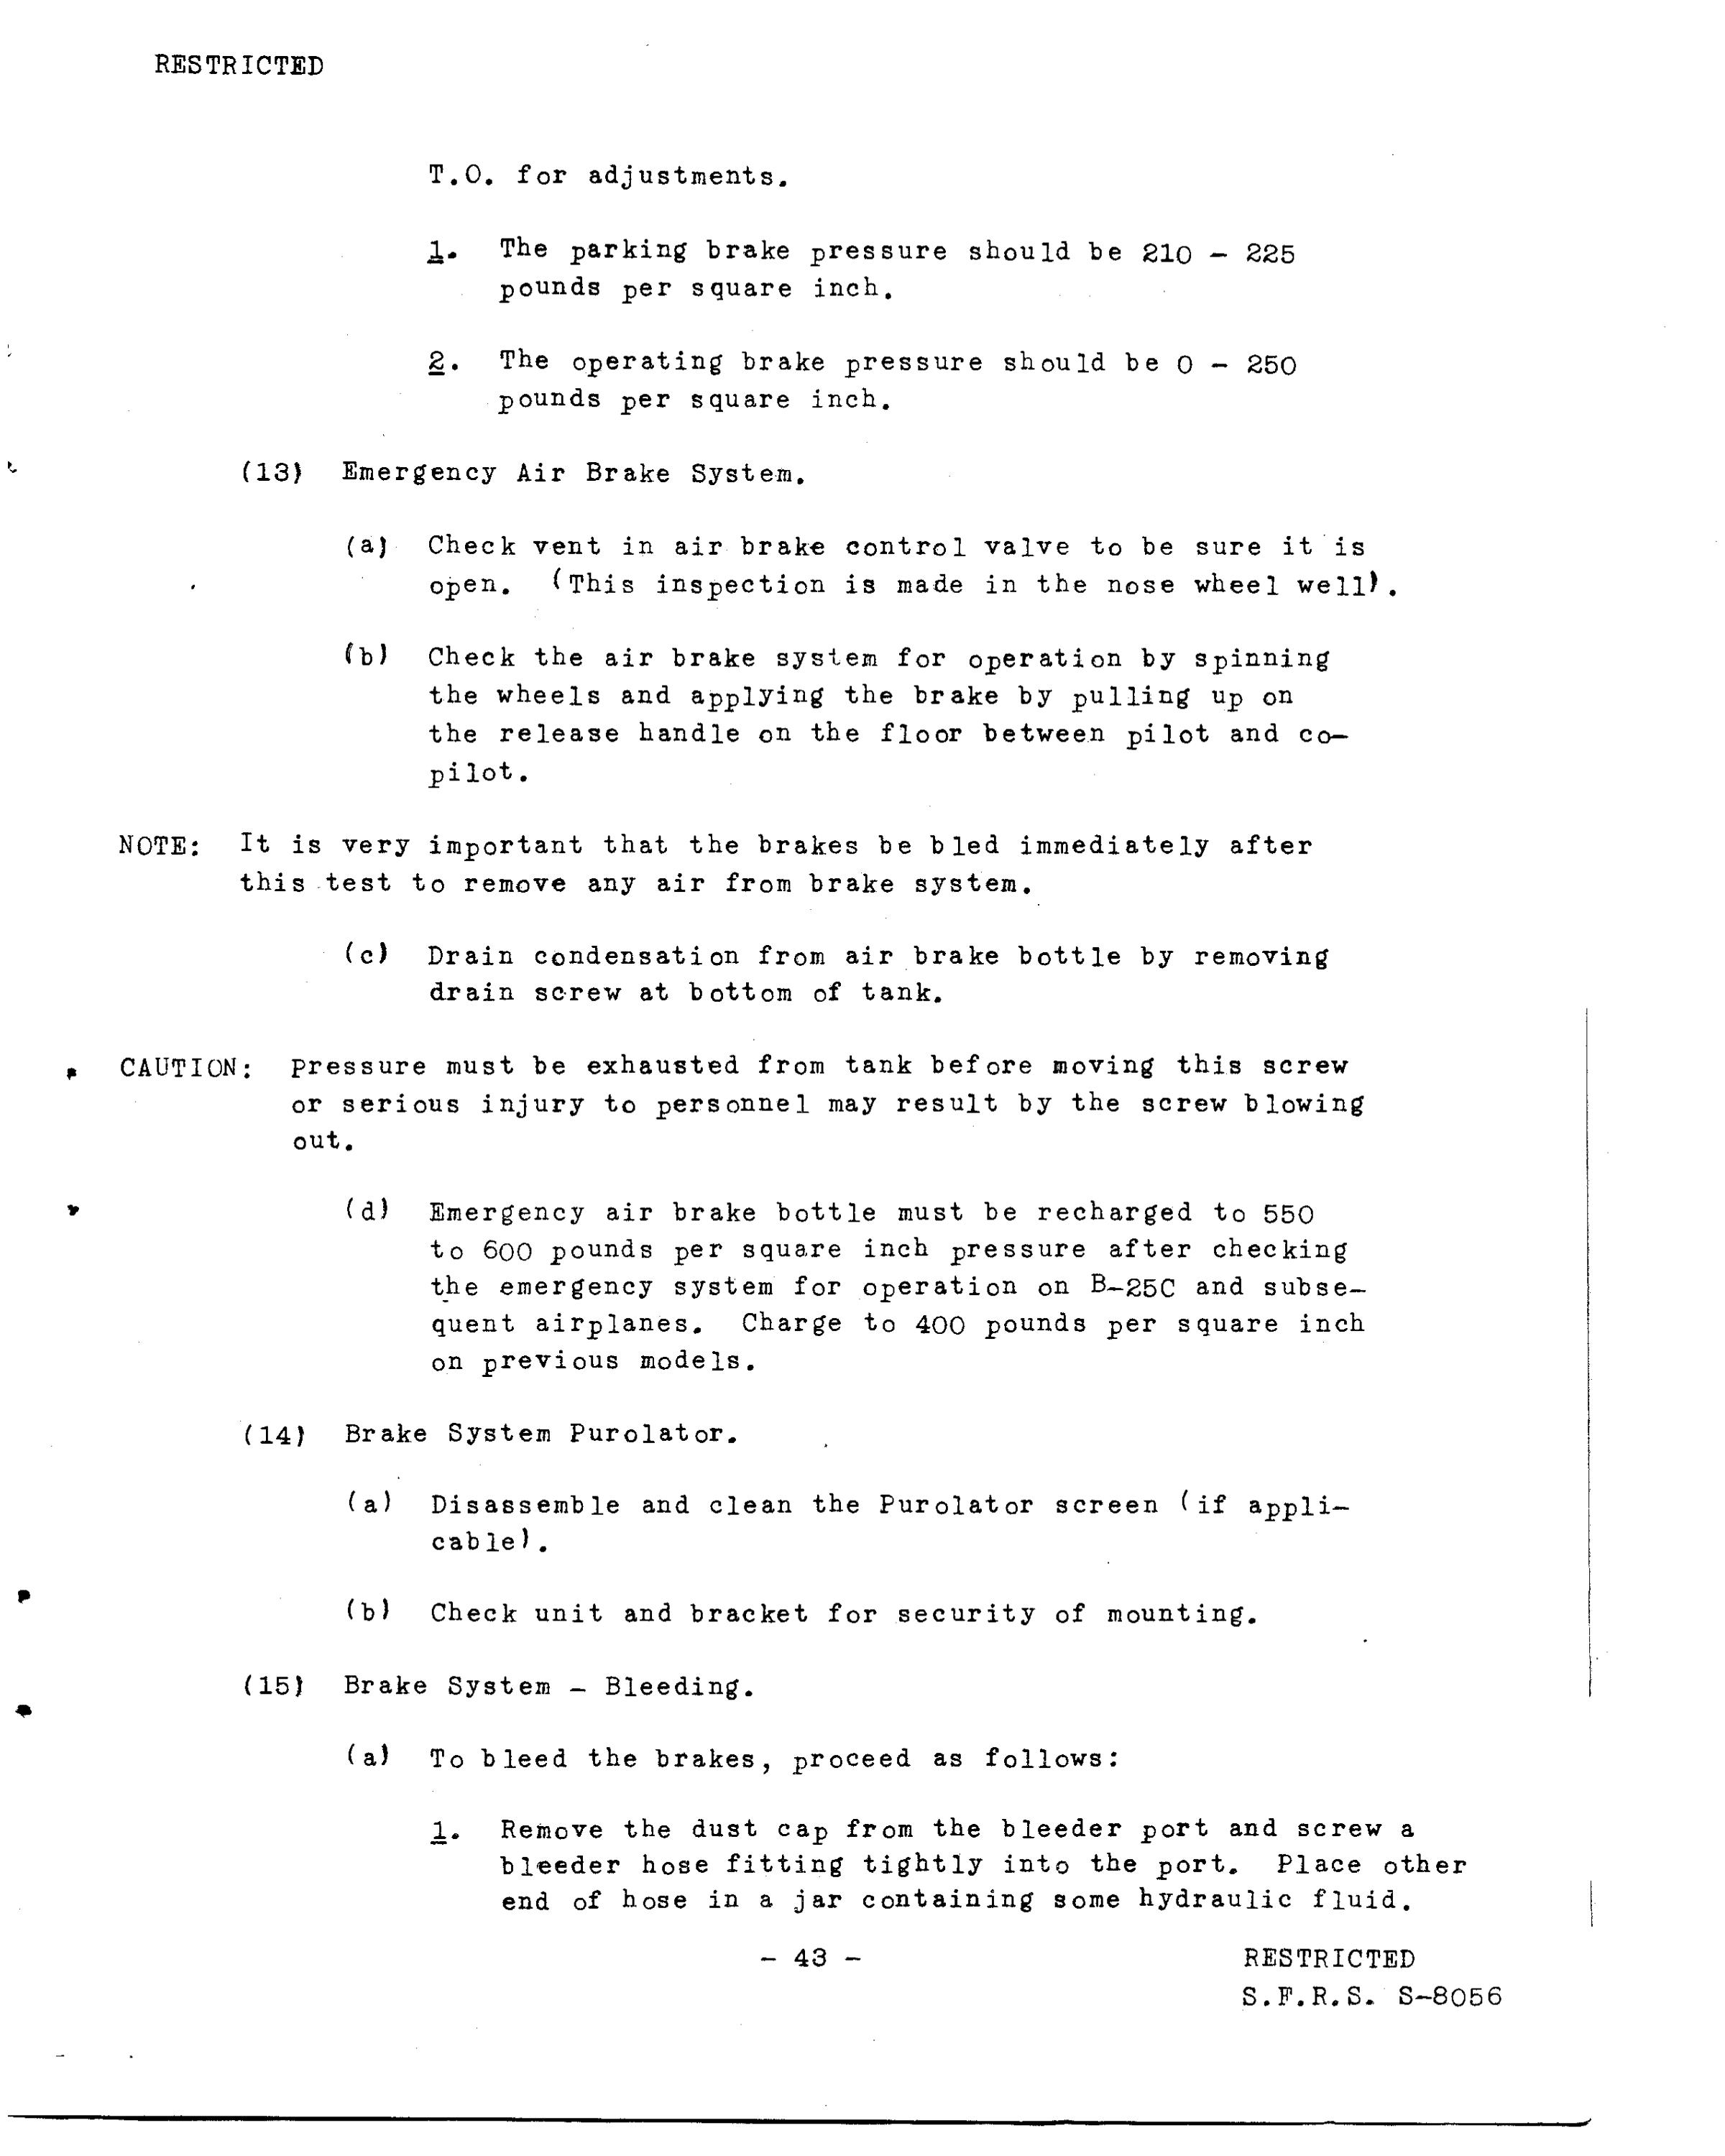 Sample page 44 from AirCorps Library document: 50 HR Inspection & Maintenance B-25 - SFRS S-8056